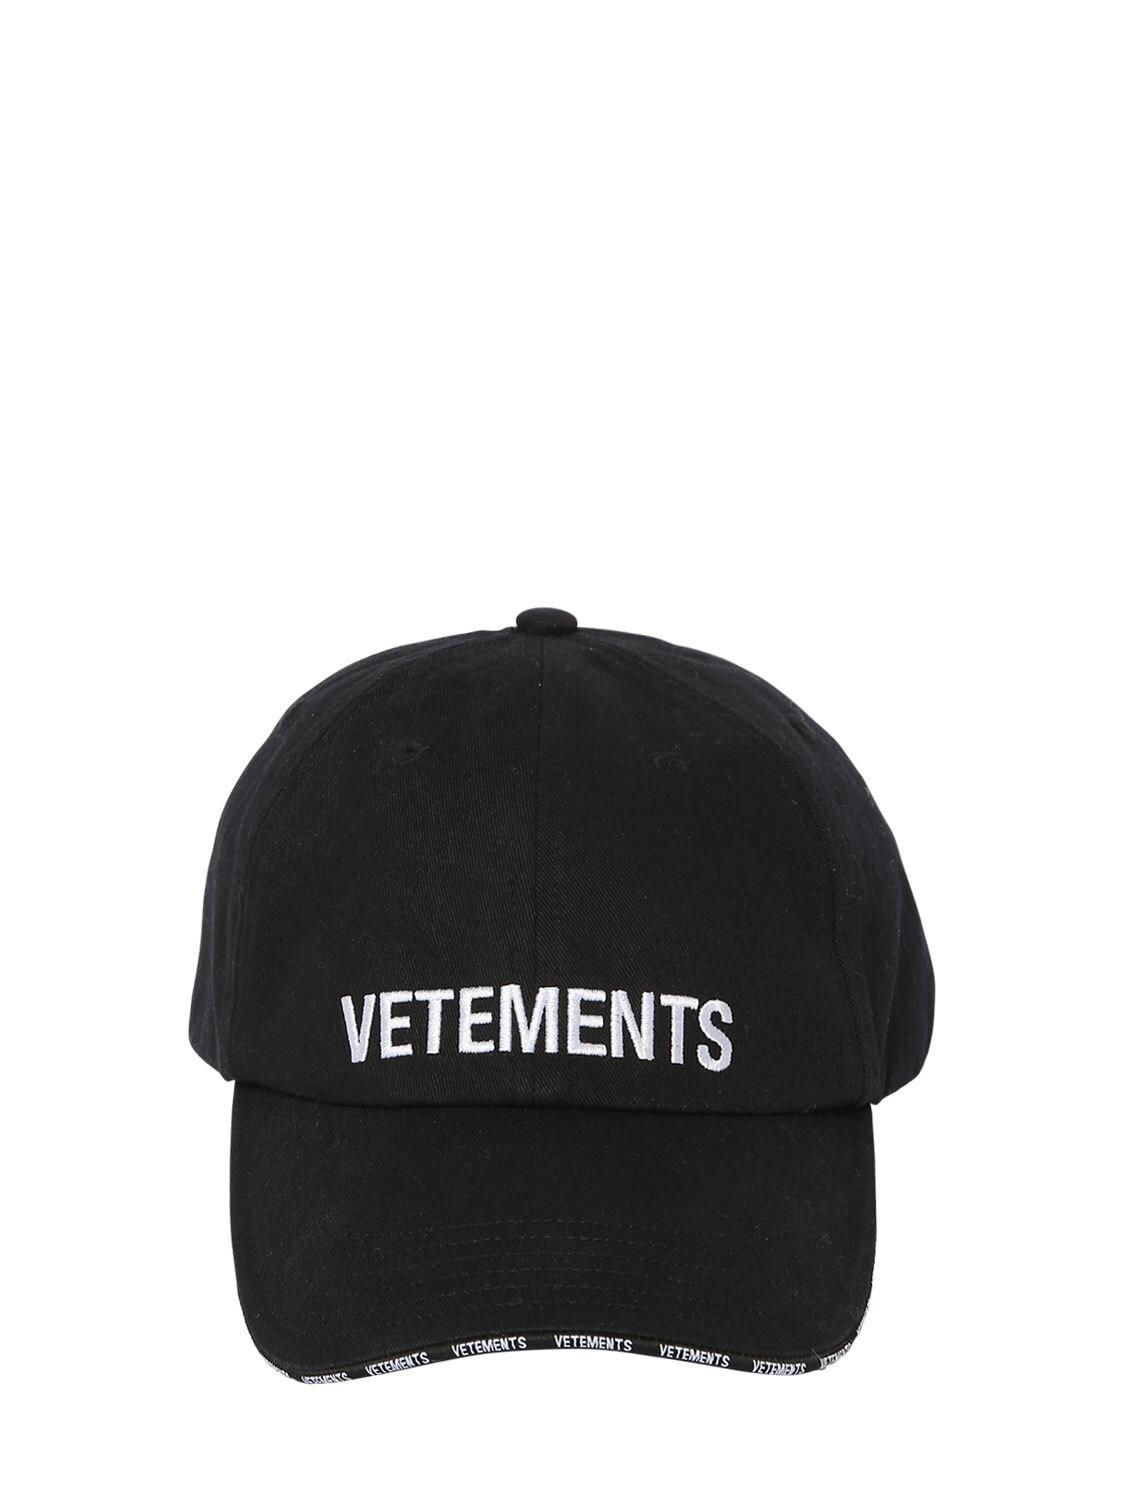 Vetements Logo Embroidered Distressed Baseball Cap in Black for Men - Lyst